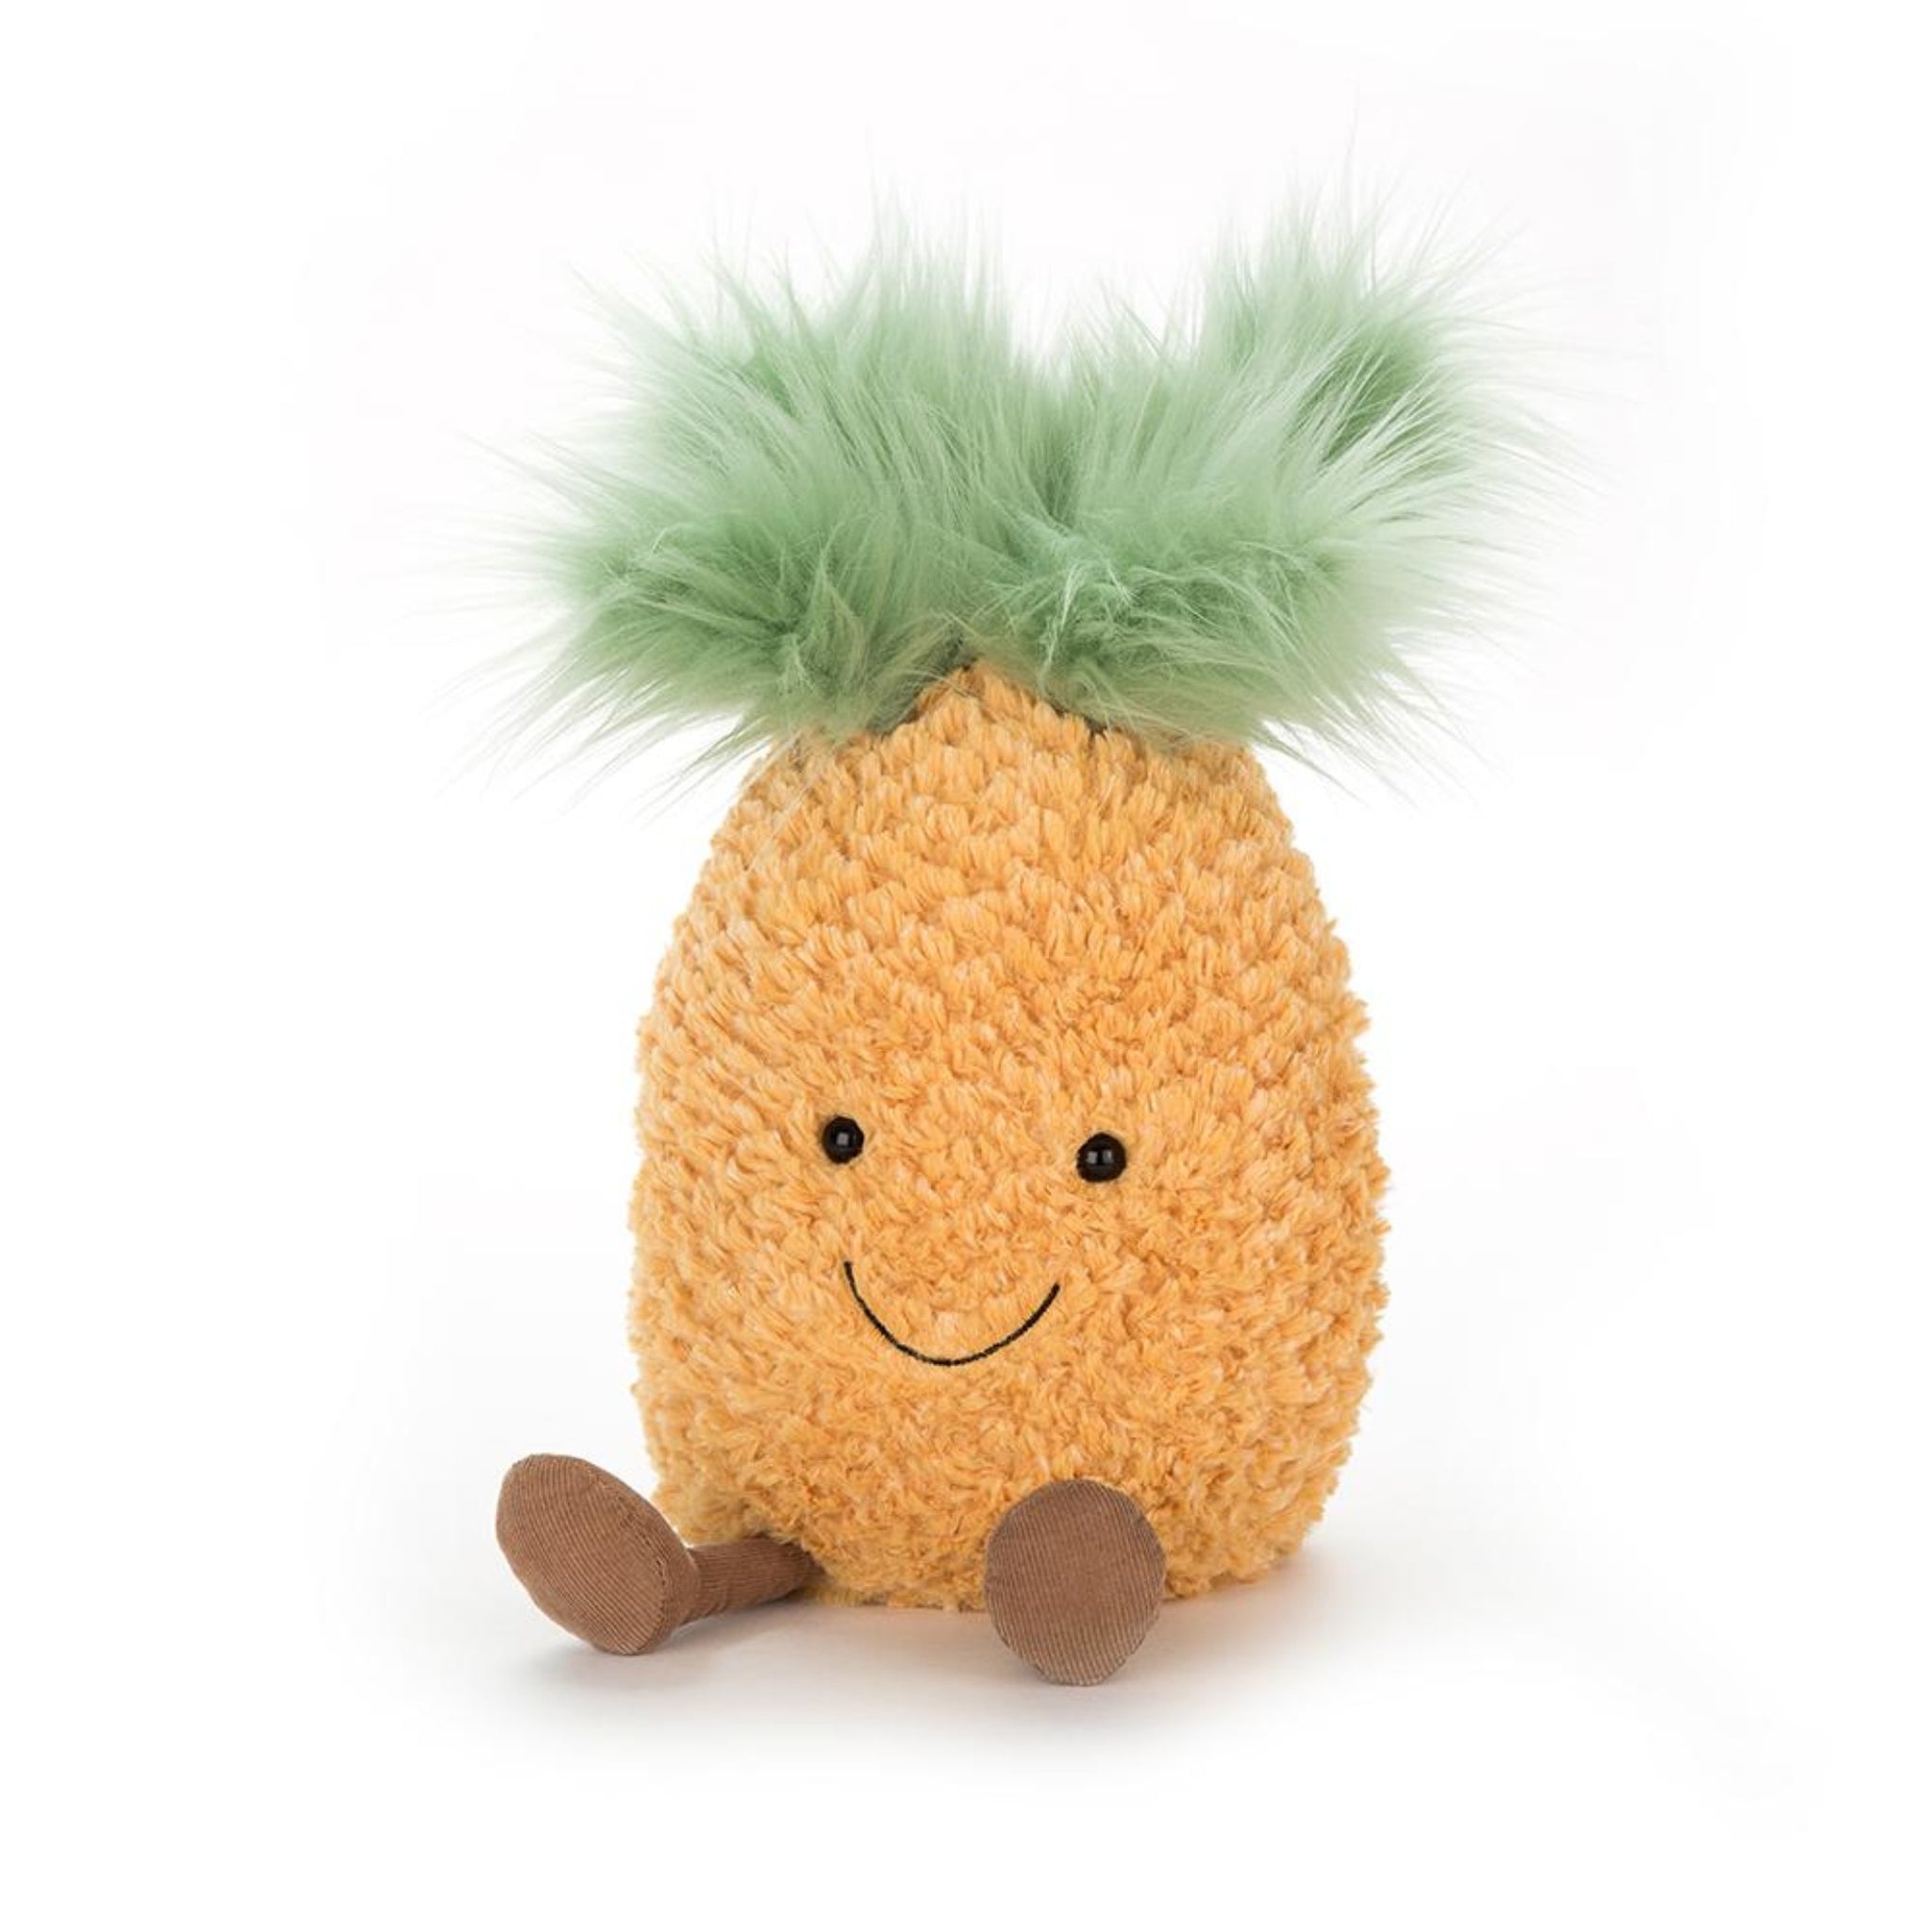 JellyCat plush small pineapple toy